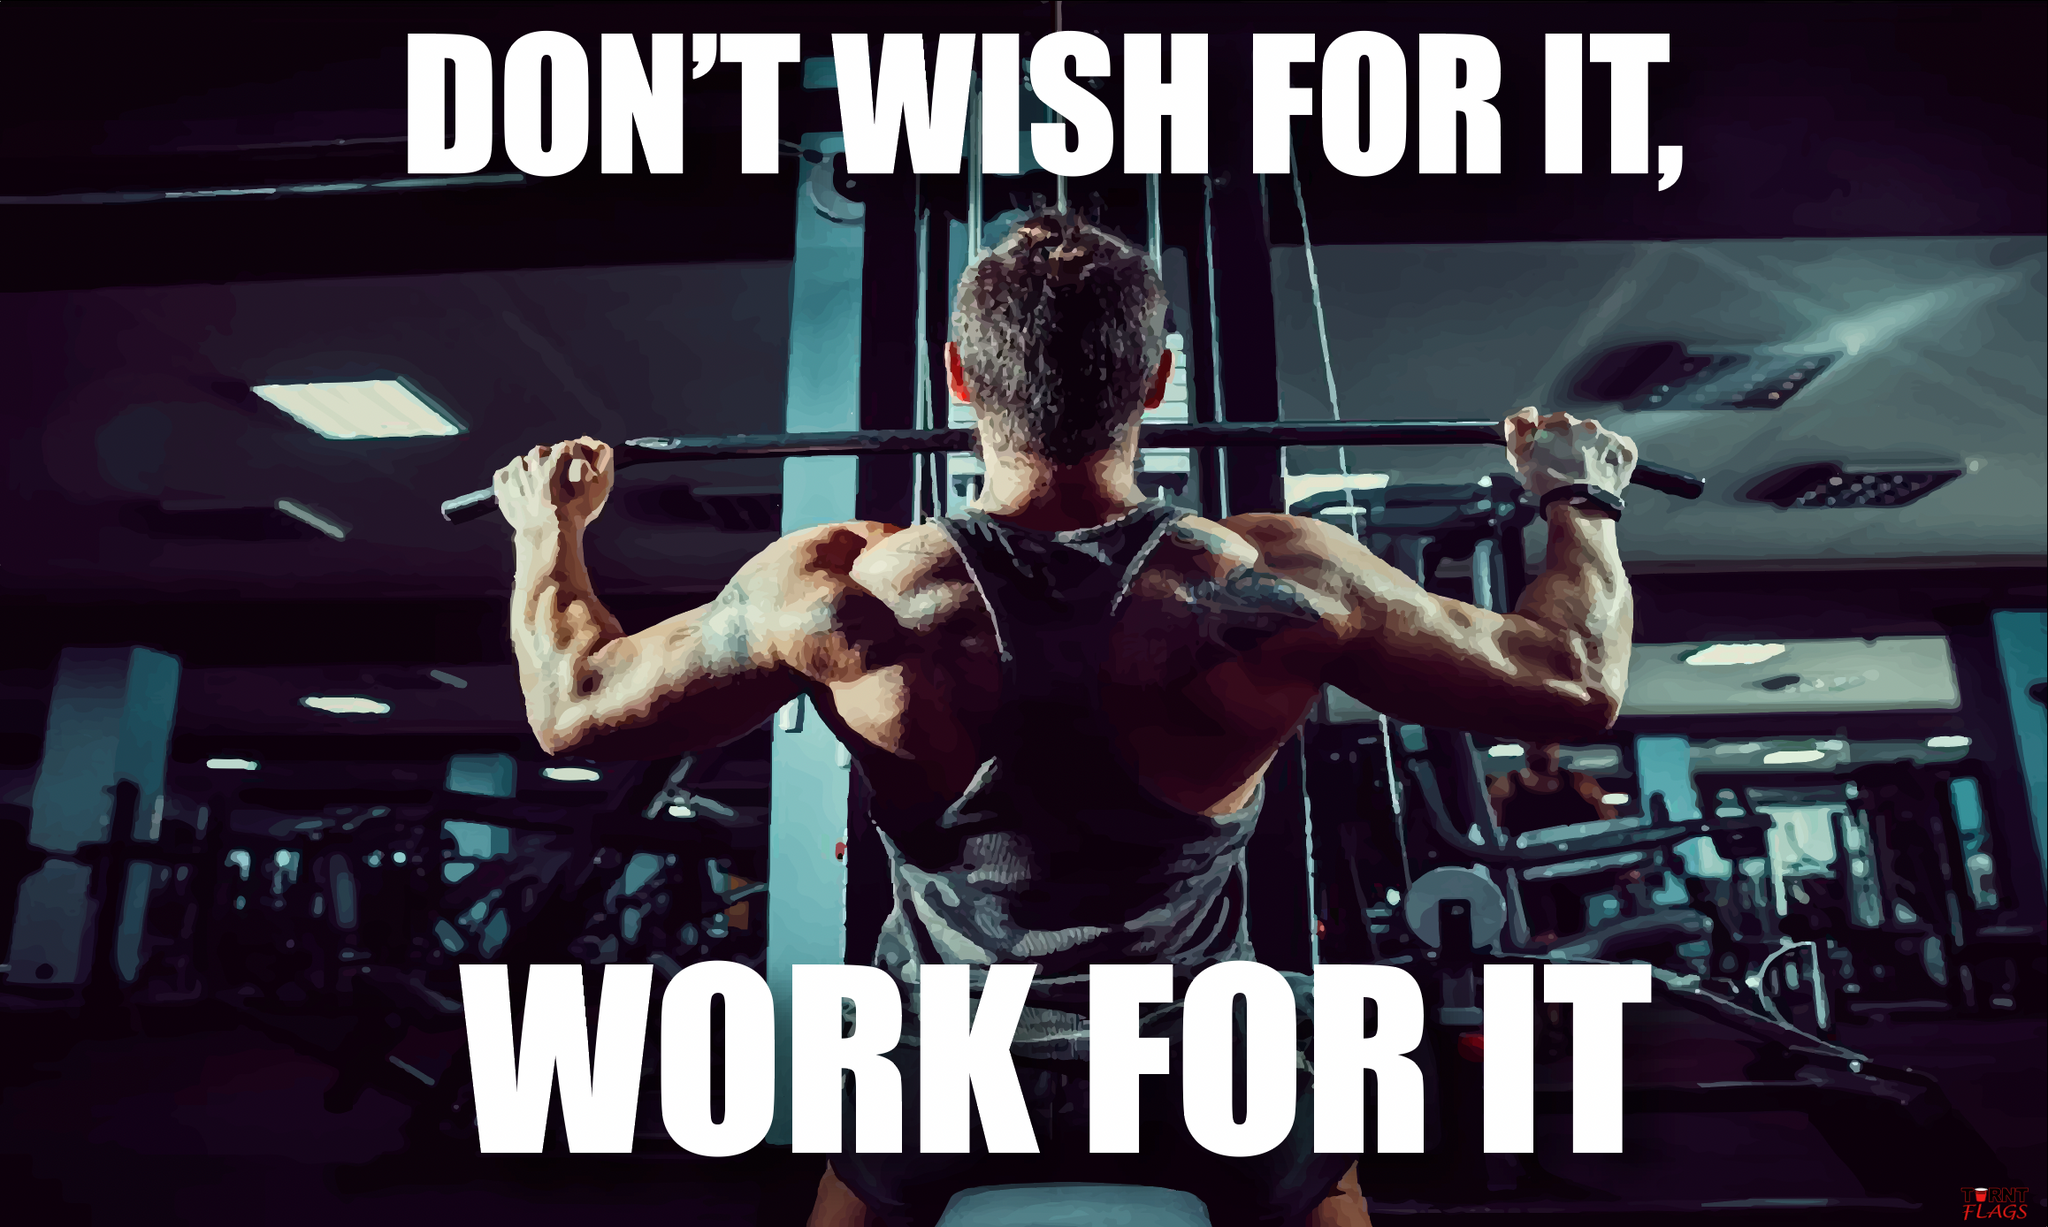 Work for it